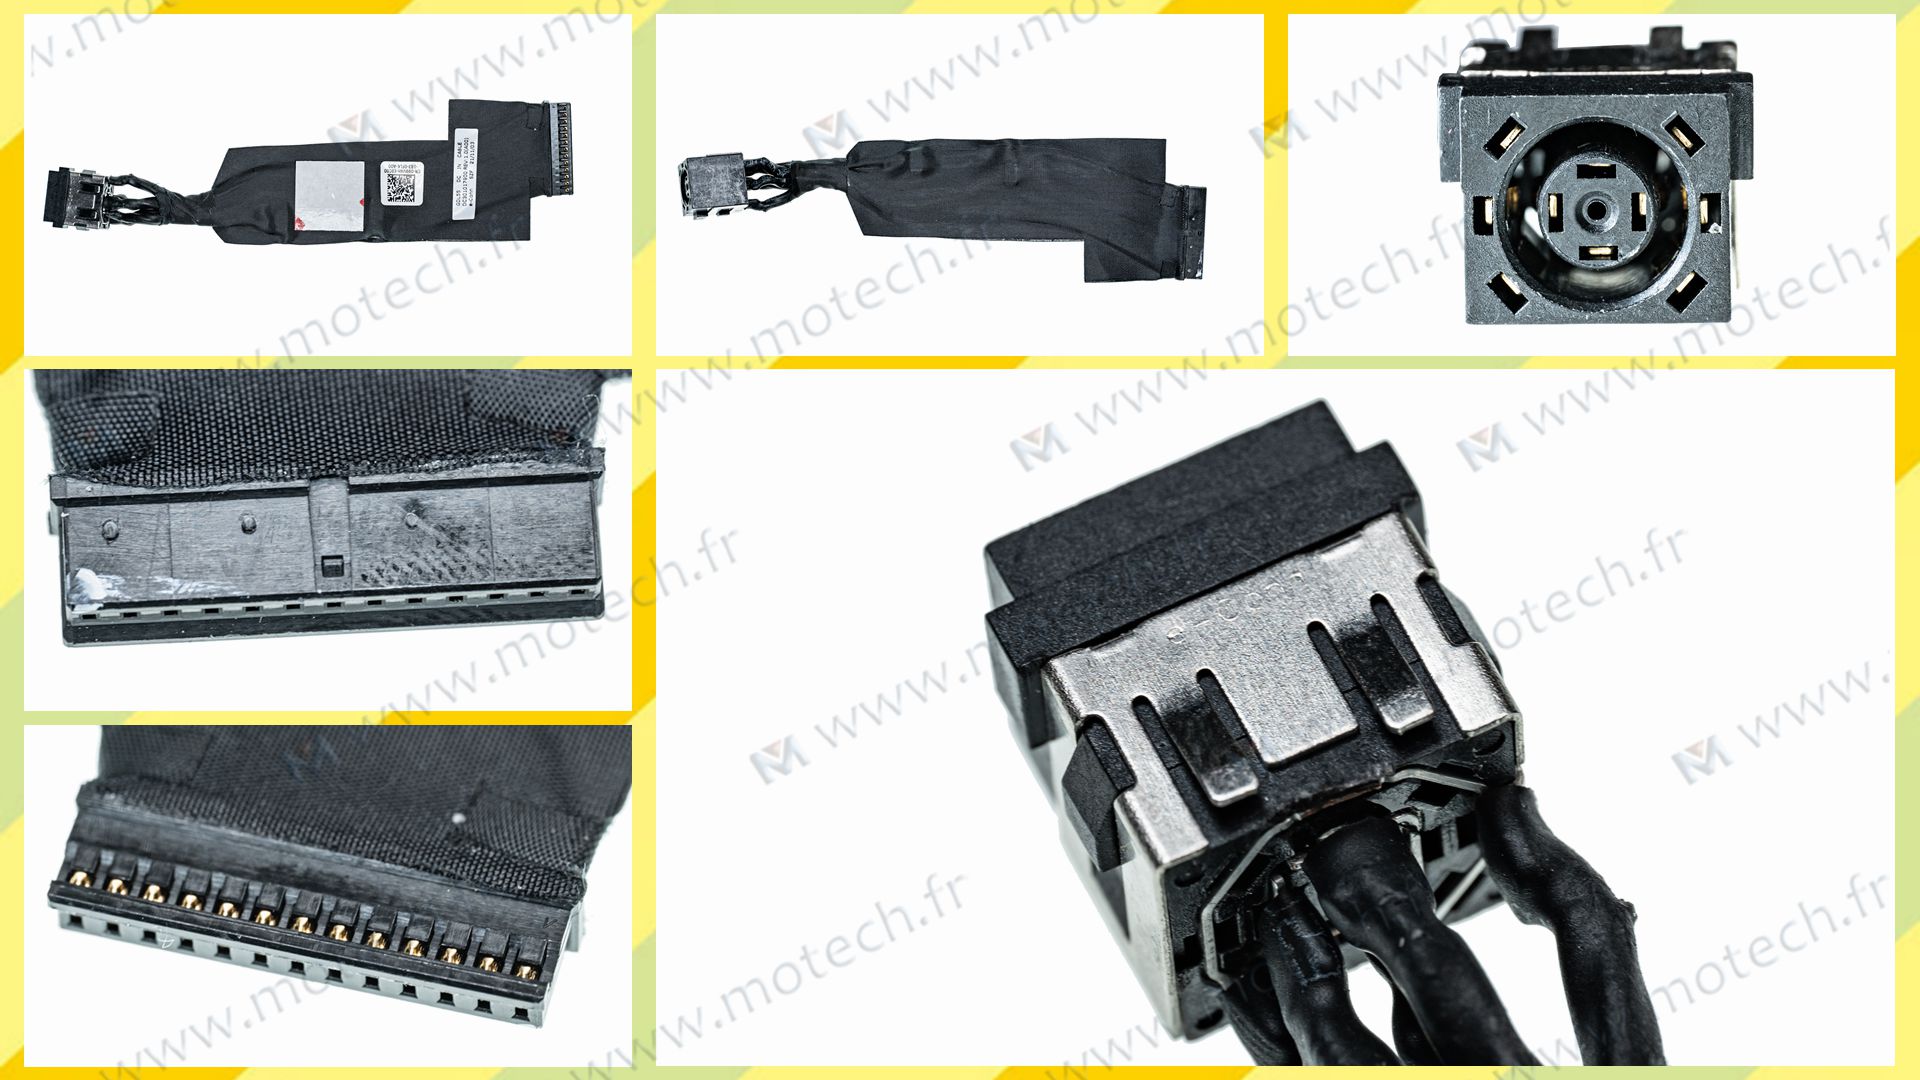 Dell G15 5510 charging connector, Dell G15 5510 DC Power Jack, Dell G15 5510 DC IN Cable, Dell G15 5510 Power Jack, Dell G15 5510 plug, Dell G15 5510 Jack socket, Dell G15 5510 connecteur de charge, 